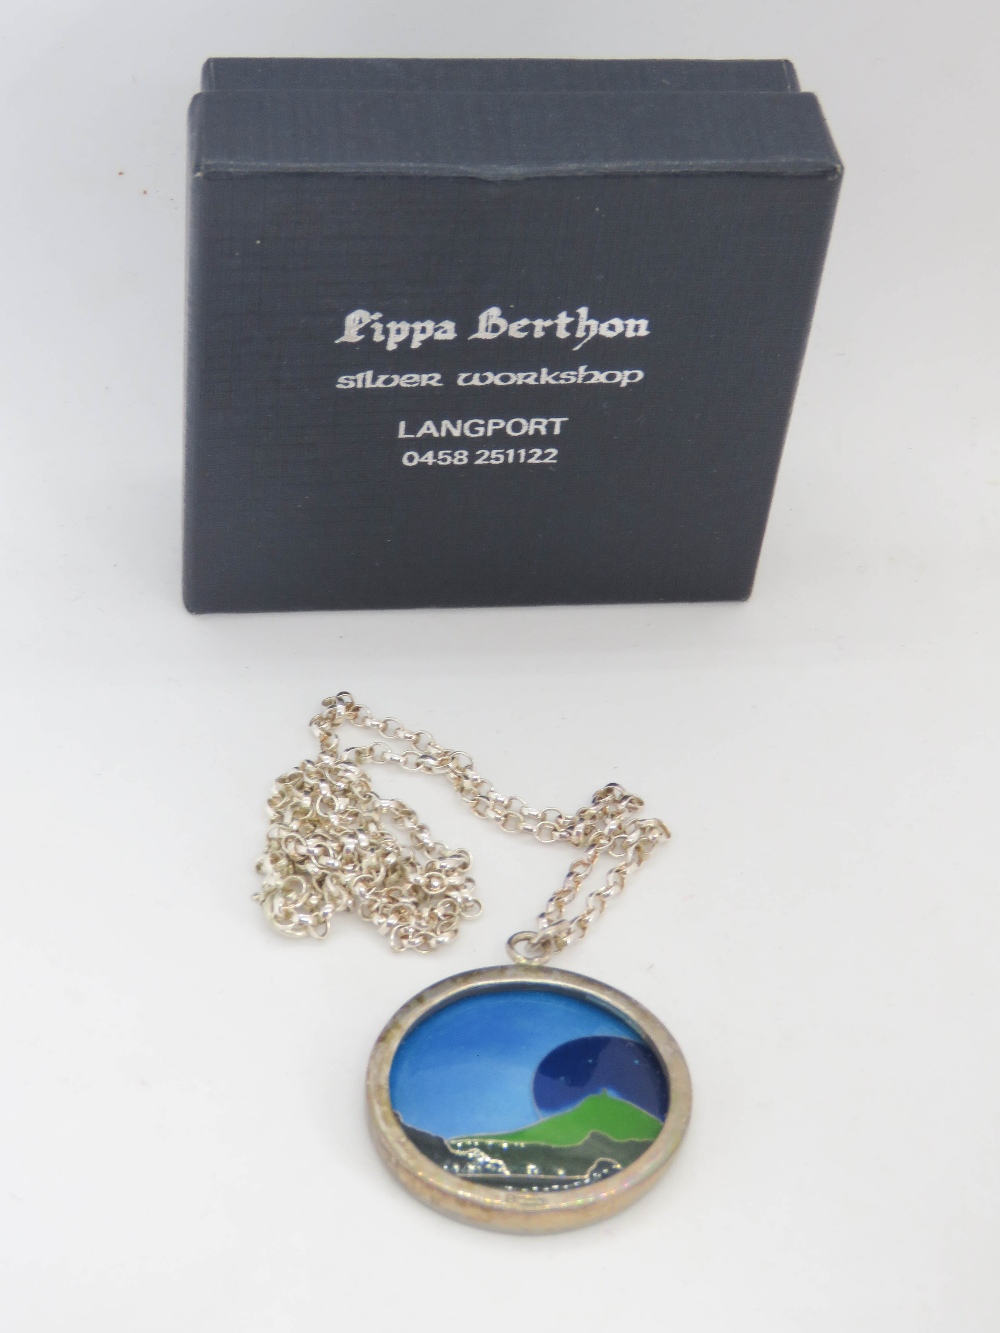 A c1970-80s Pippa Graham - Berthon (Langport) hallmarked silver and enamel pendant, on silver chain,